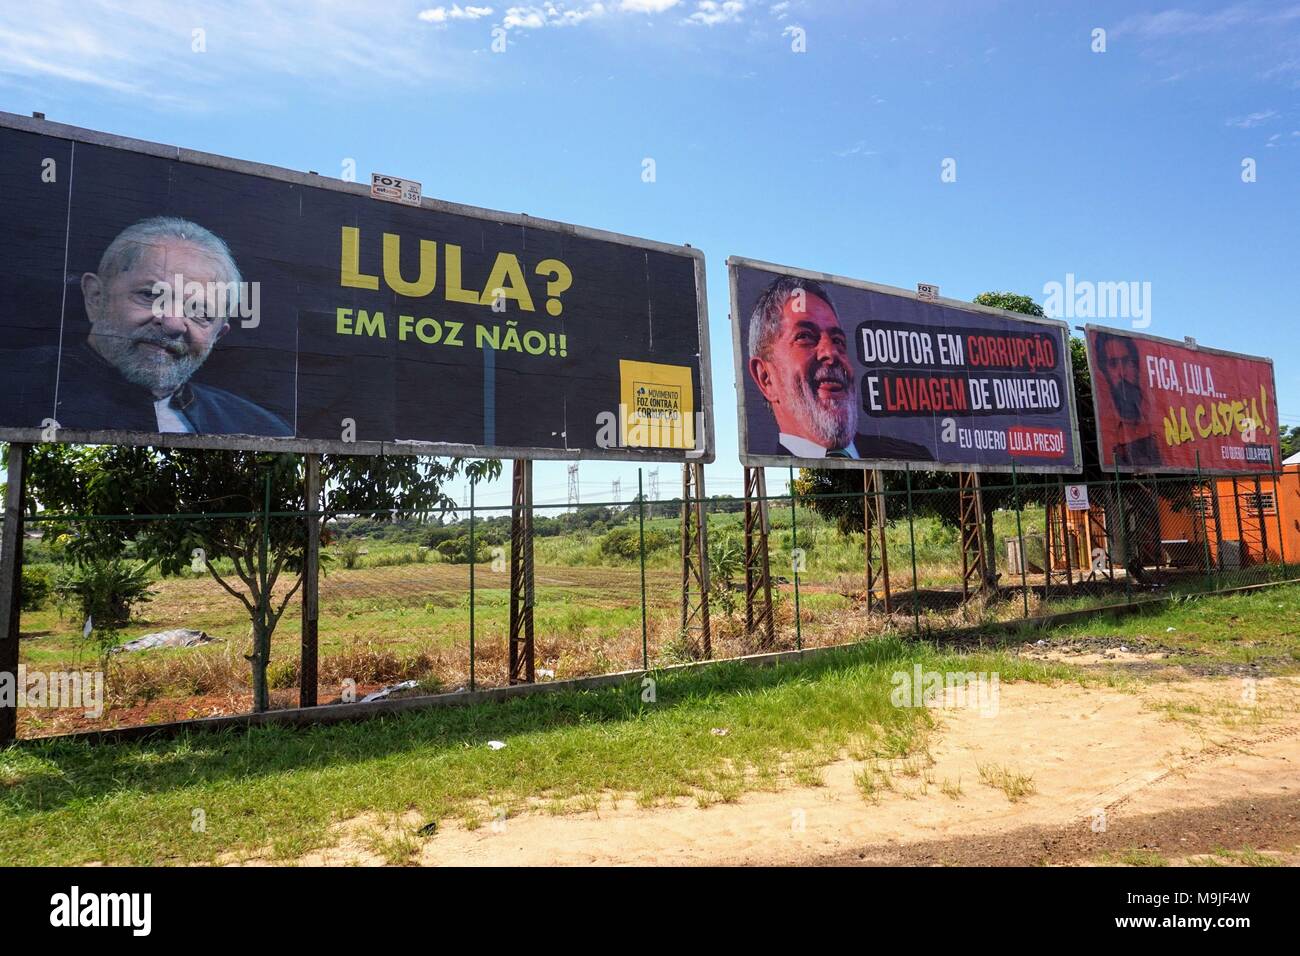 FOZ DO IGUAÇU, PR - 26.03.2018: CARAVANA LULA EM FOZ DO IGUAÇU PR - Former President Luiz Inácio da Silva arrived in Foz do Iguaçu amid threats and protests. Before the former president&#39;s icipatipation there was confrontation of anti-Lula demonstrators with the Military Police. Morale bombs and rubber bullets were used to disperse protesters. Lula participated in the International Seminar of the Triple Border at the Foz do Iguaçu Electricity Trade Union (Sinefi). The theme in question is education and integration between Latin American countries and has a special meaning for the former pre Stock Photo